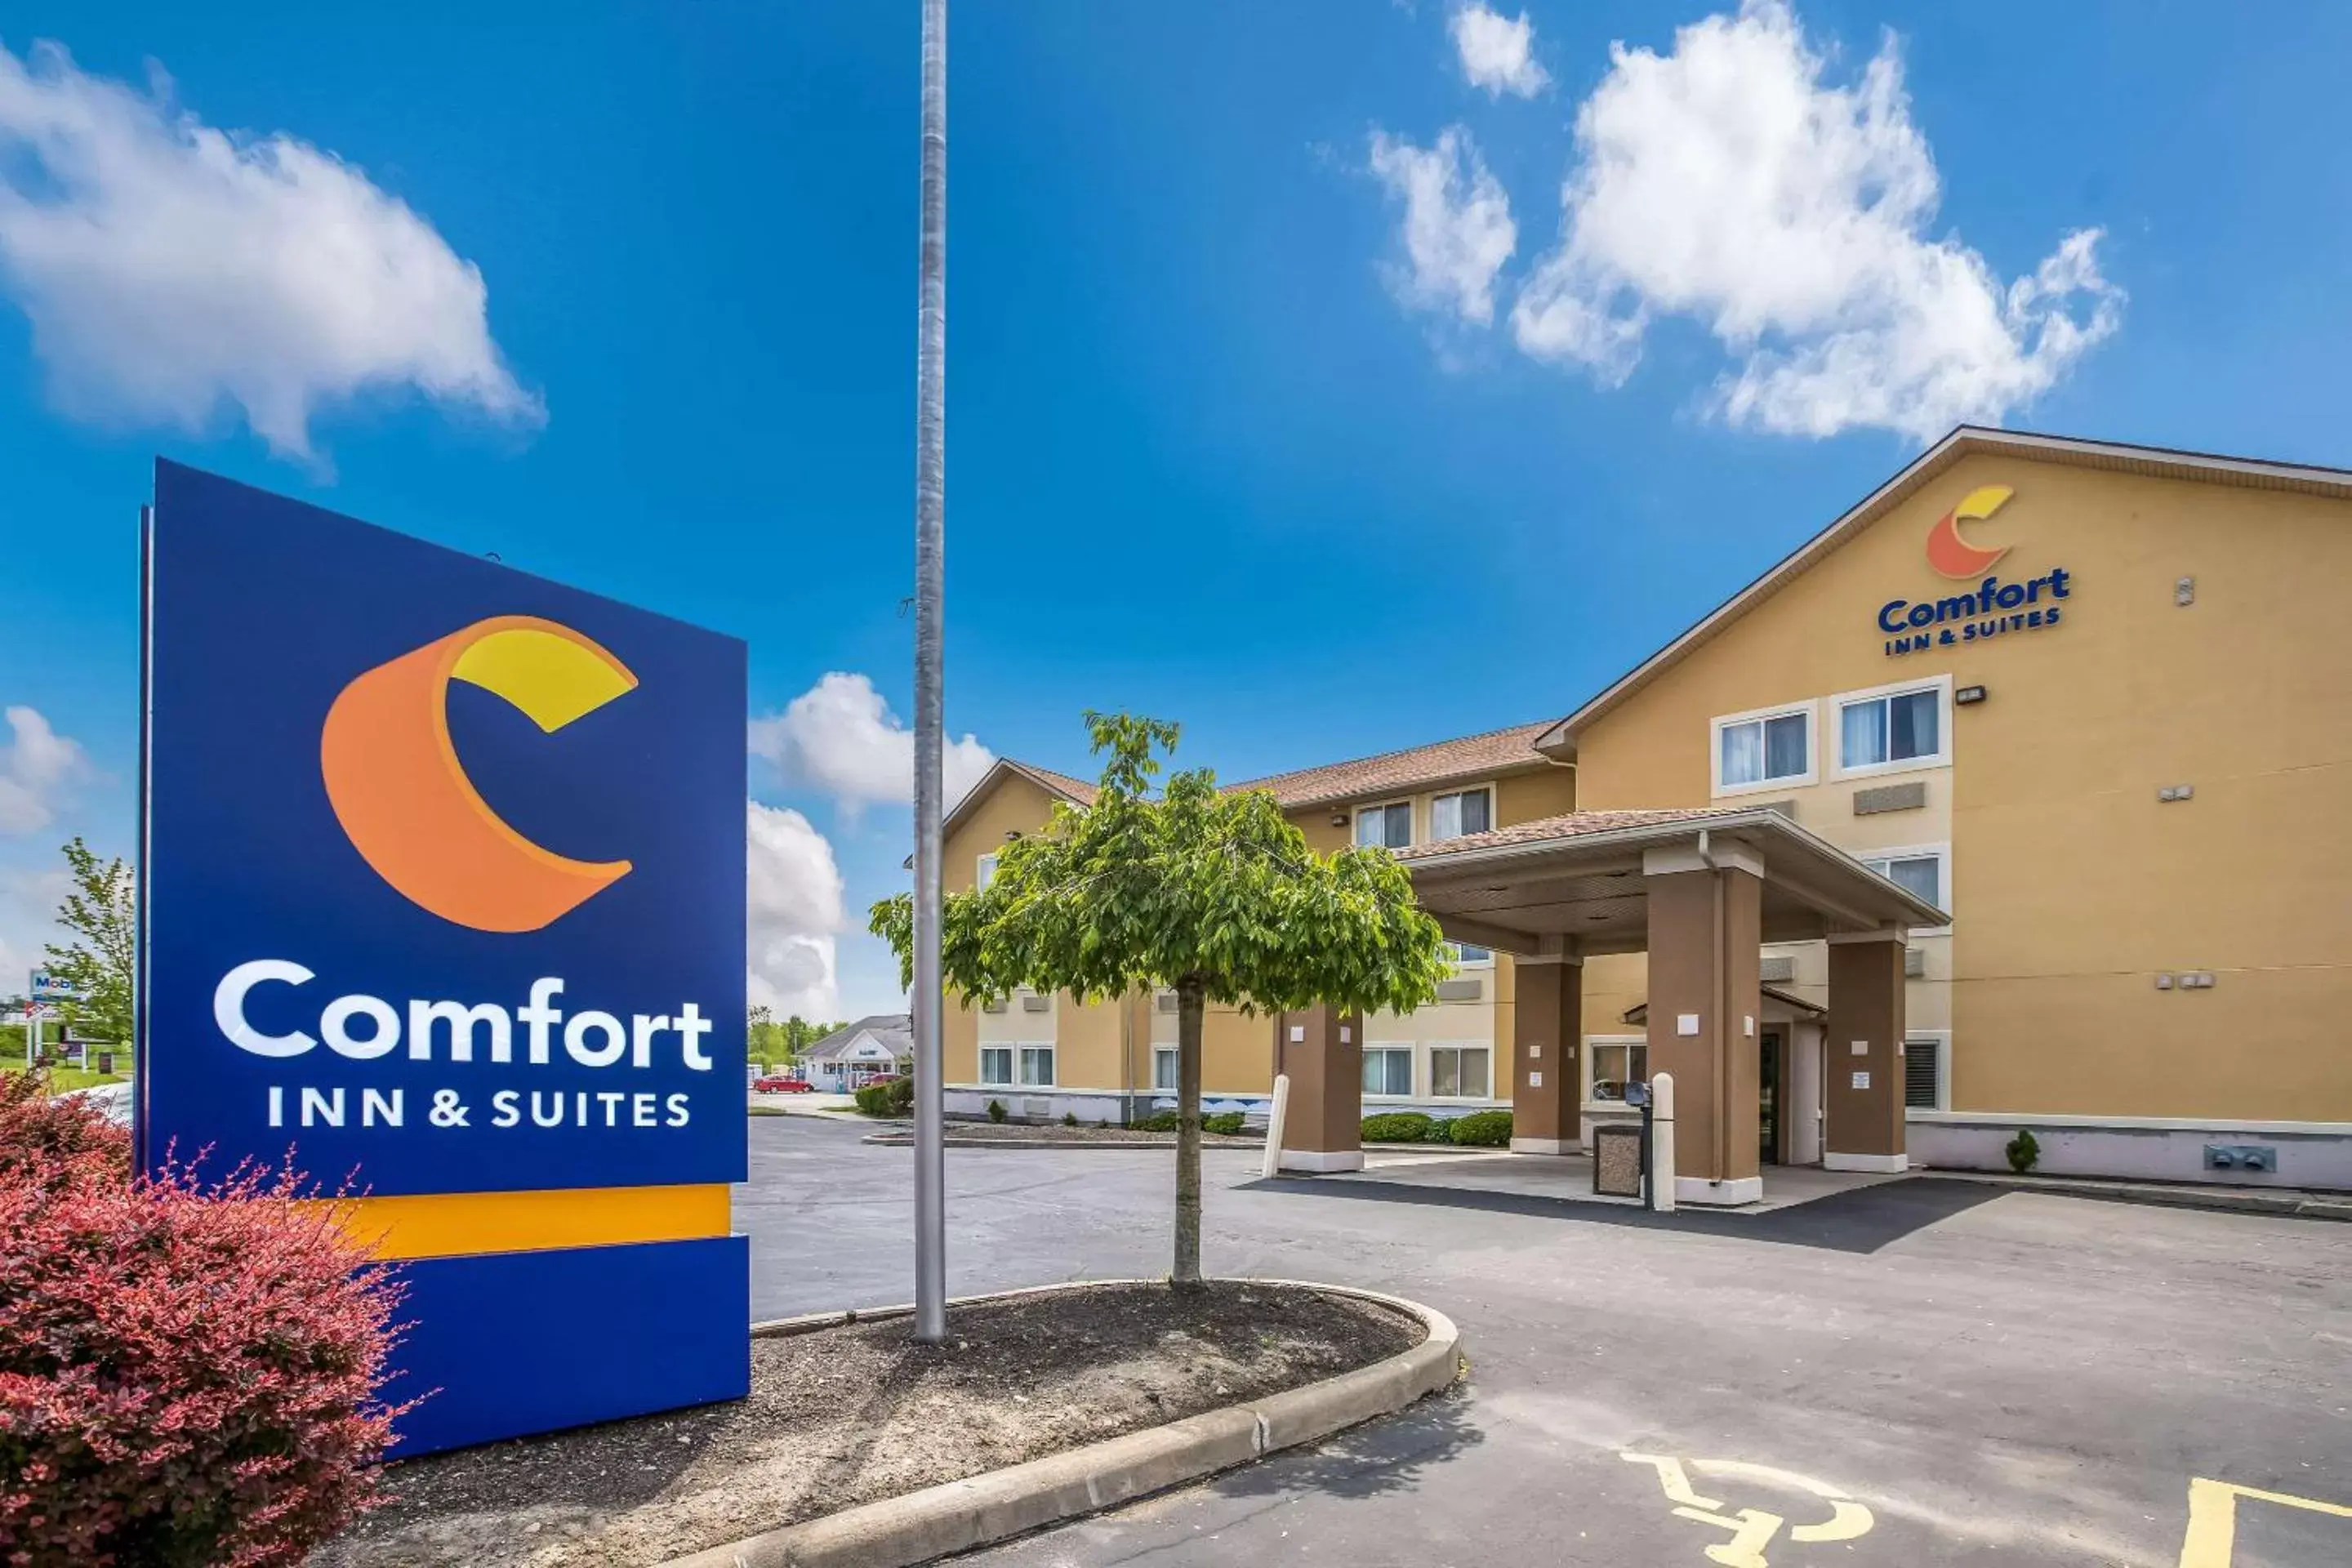 Property building in Comfort Inn & Suites Fairborn near Wright Patterson AFB